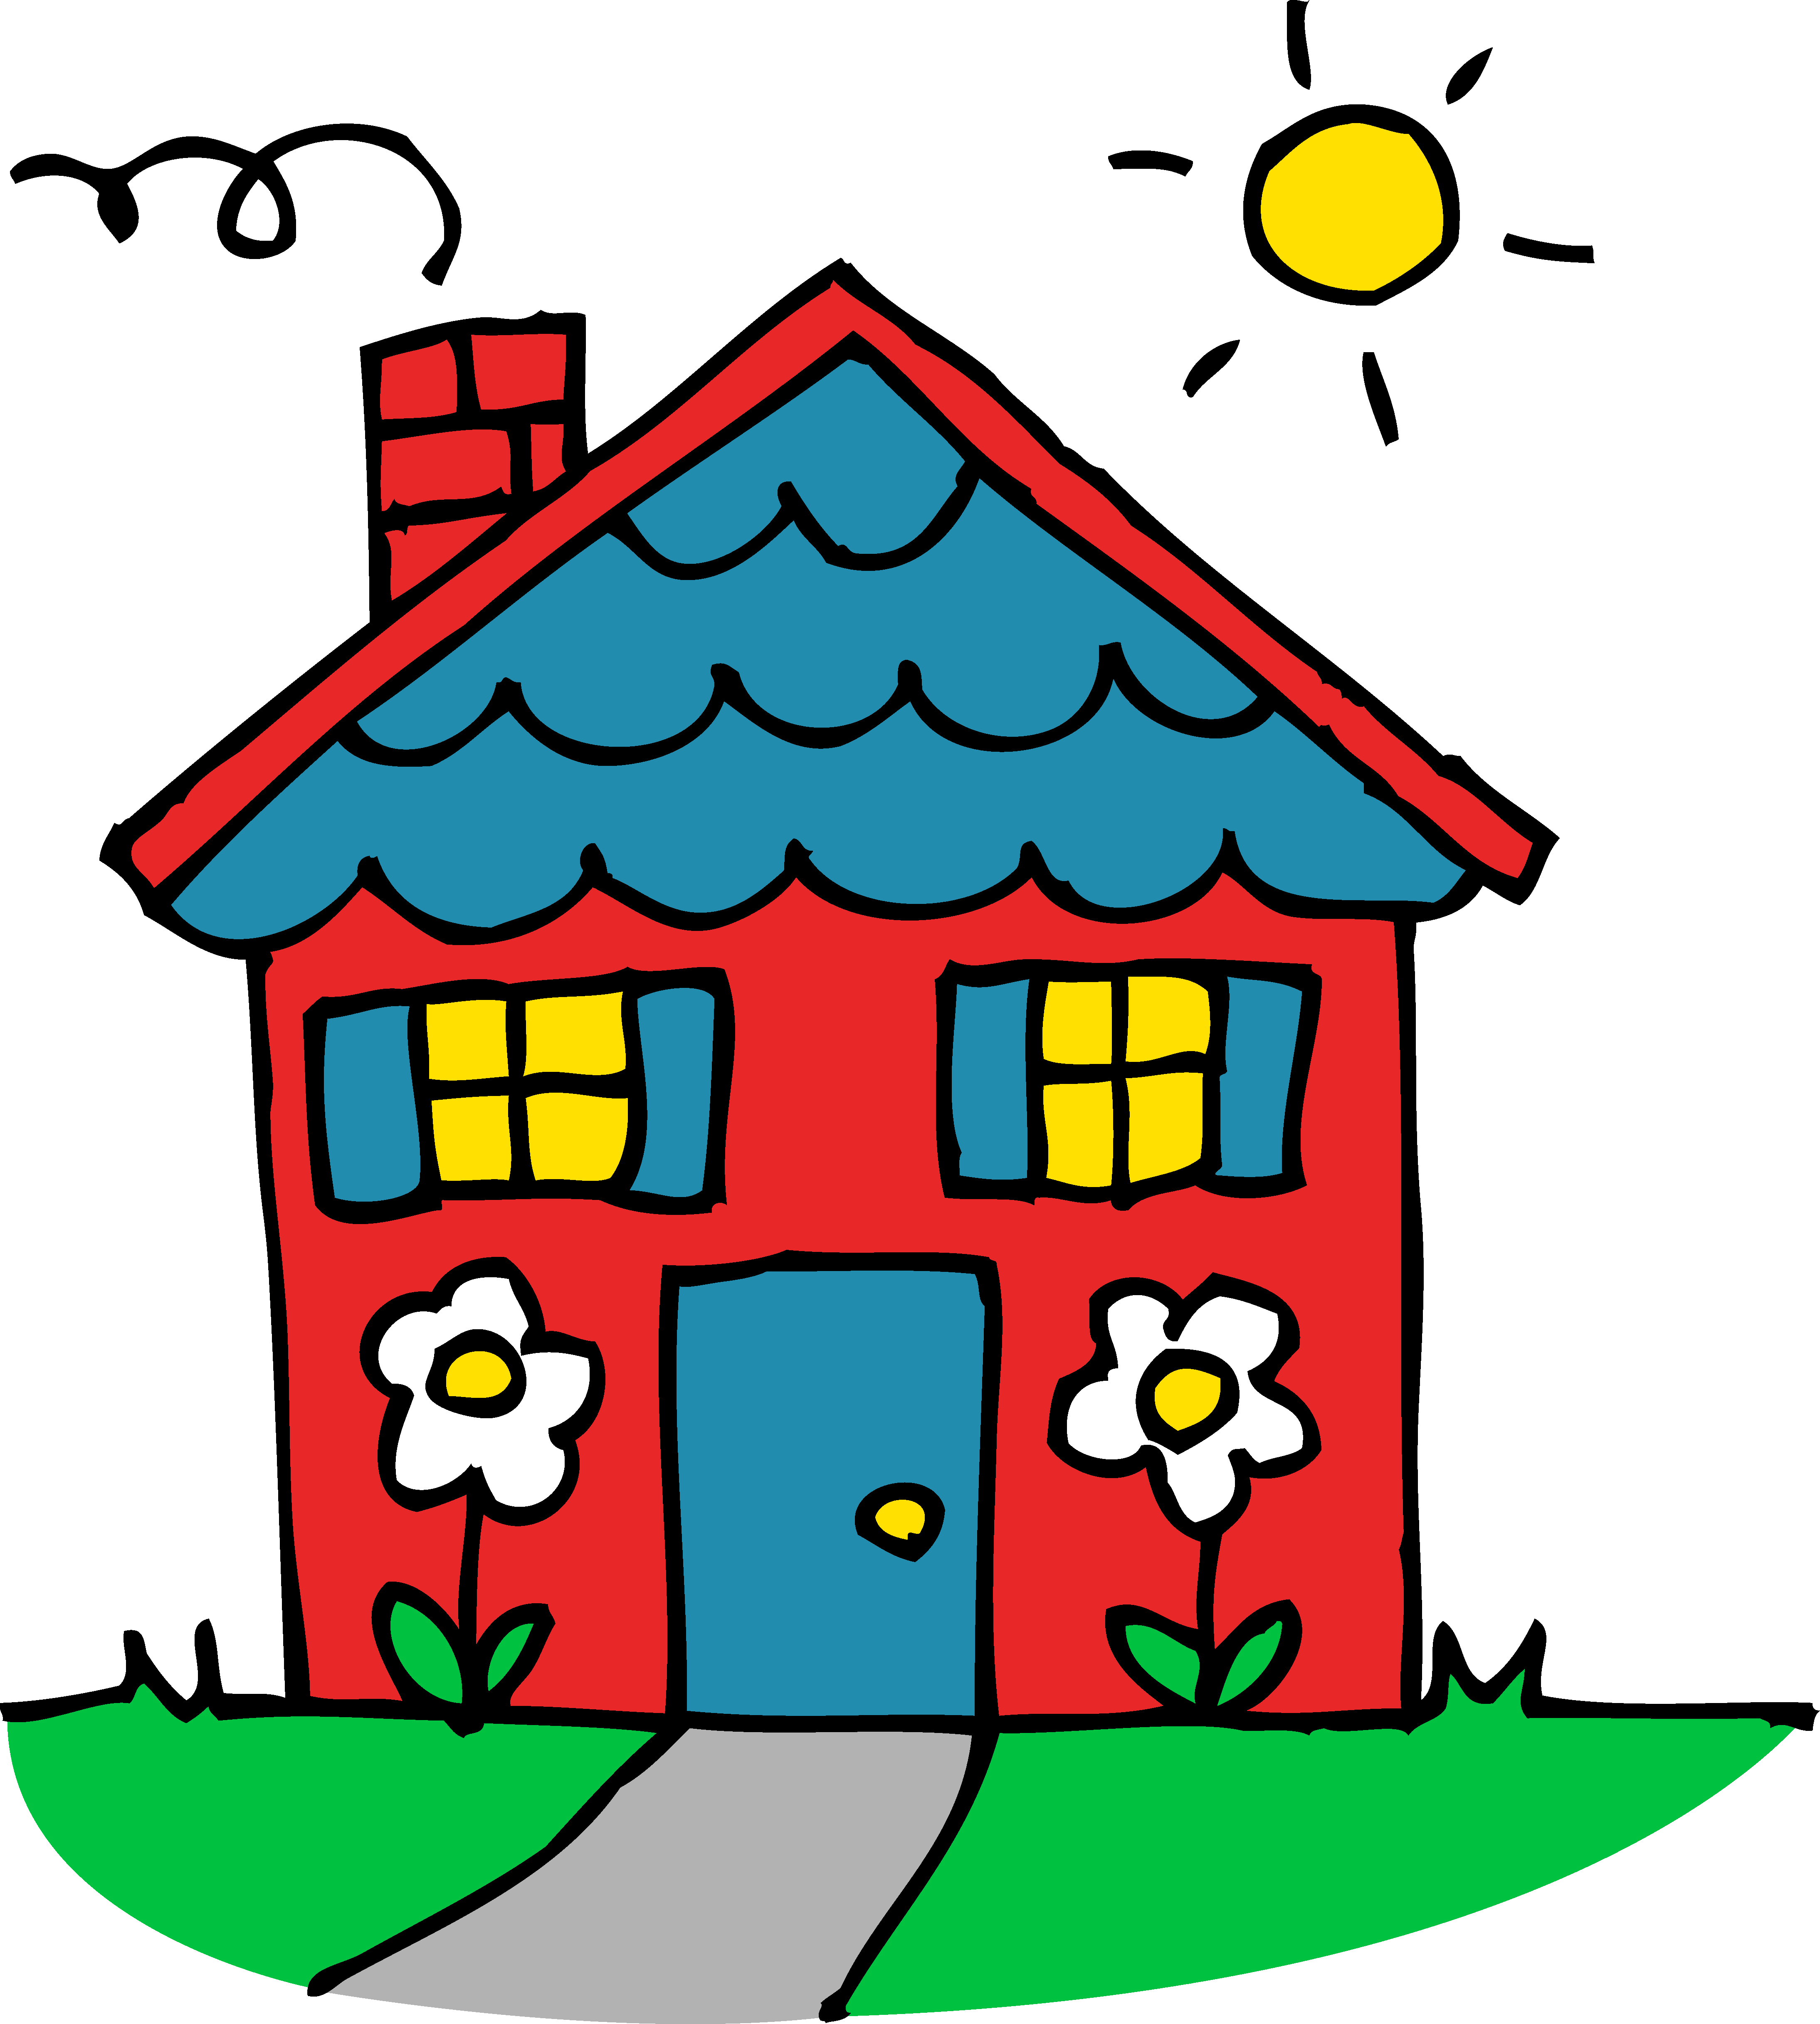 Sold House Clip Art | Clipart library - Free Clipart Images